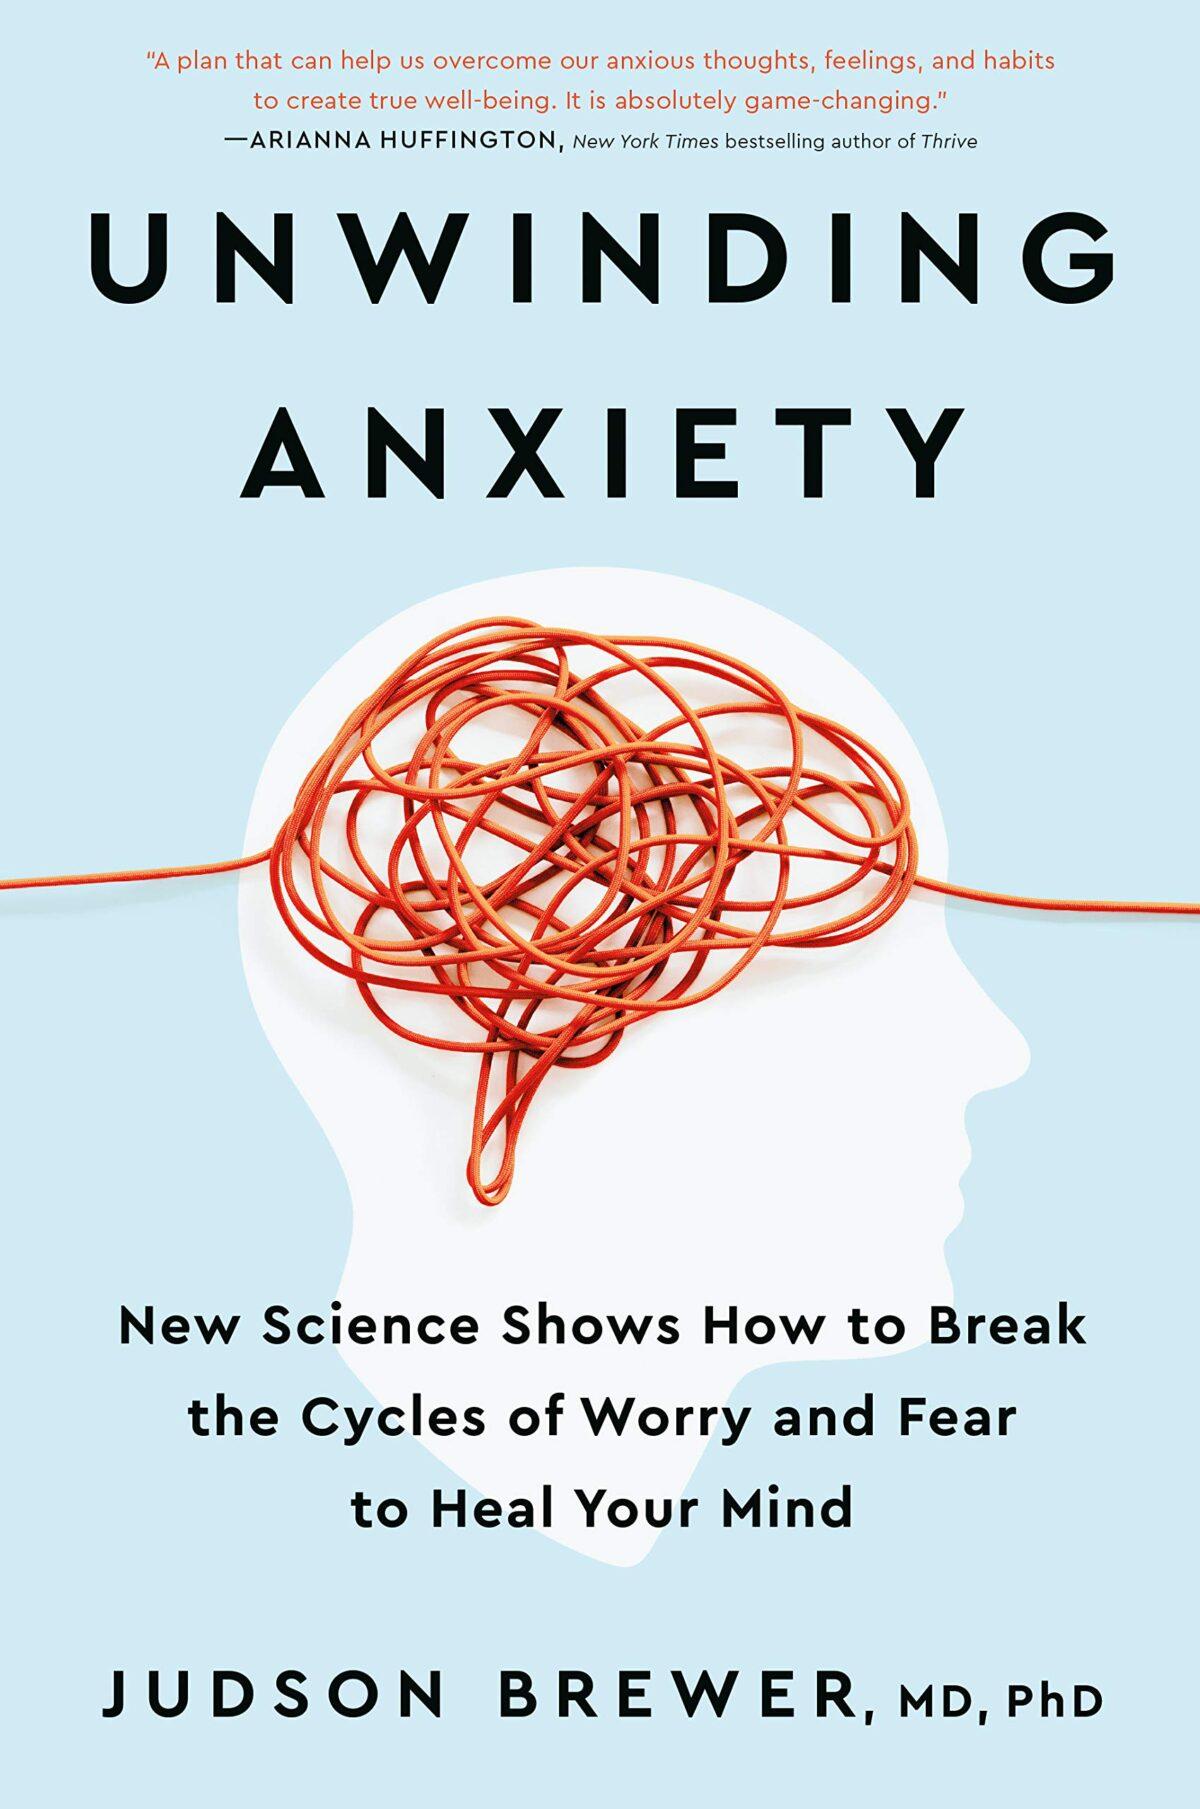 Unwinding Anxiety: New Science Shows How to Break the Cycles of Worry and Fear to Heal Your Mind, by Judson Brewer, was published by Avery, an imprint of Penguin Books USA, in March 2021.